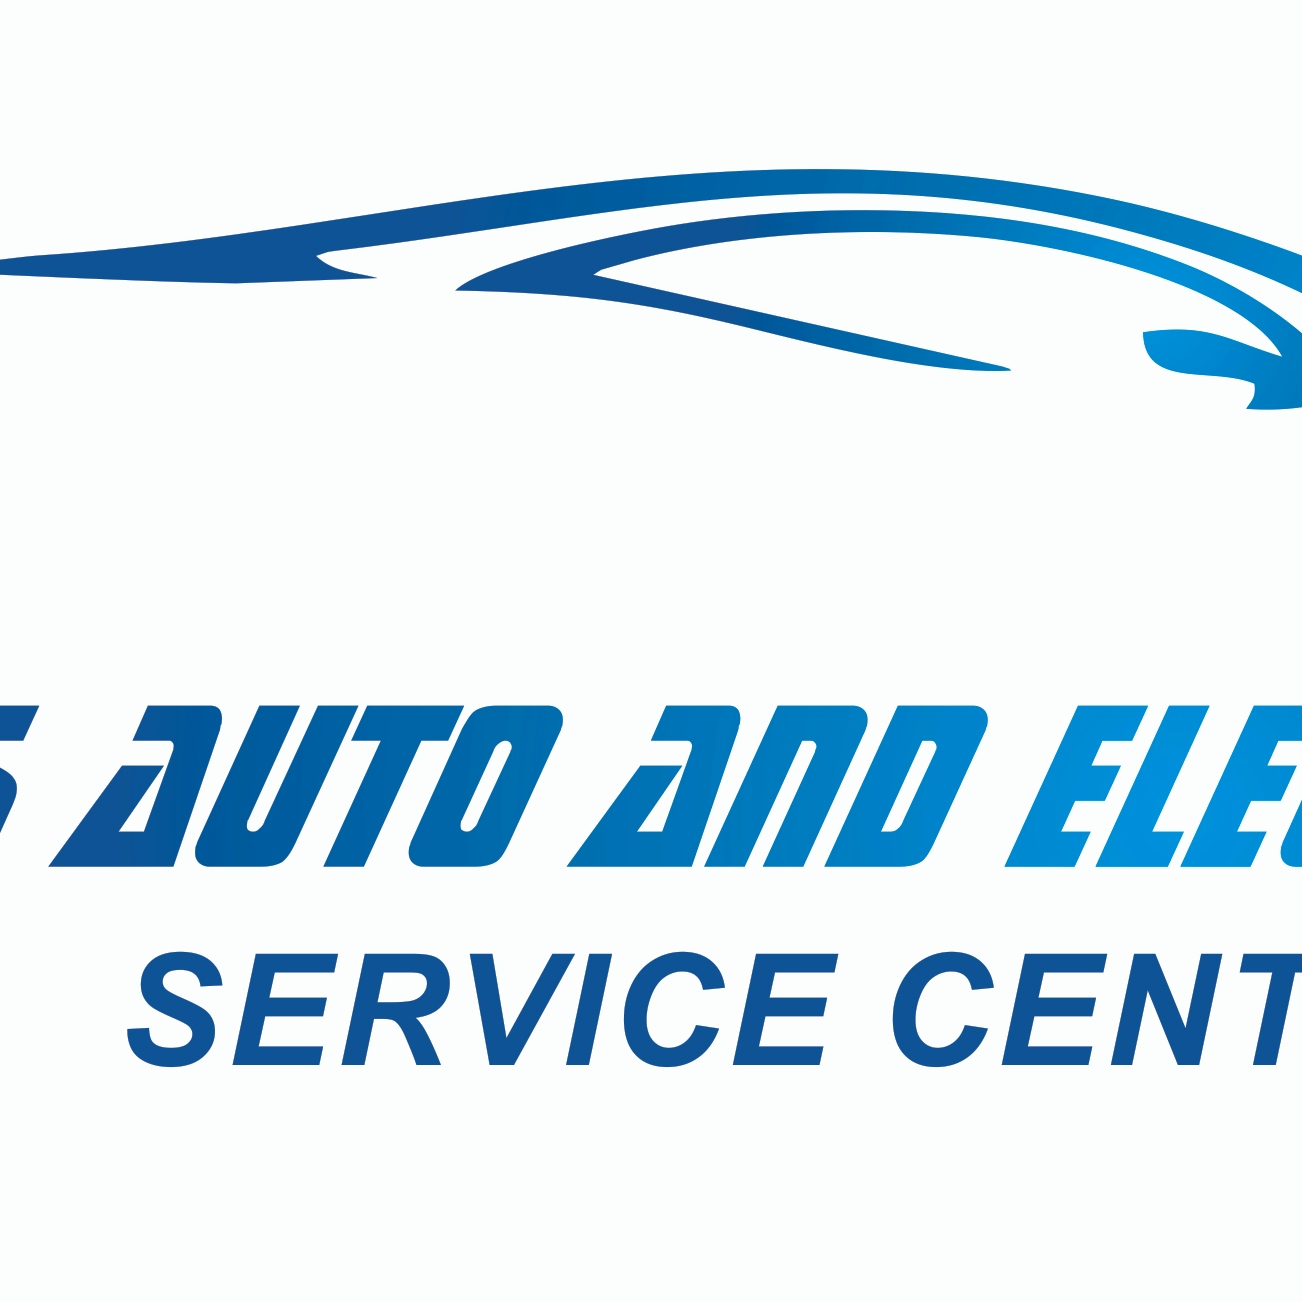 D and S Auto and electrical service centre